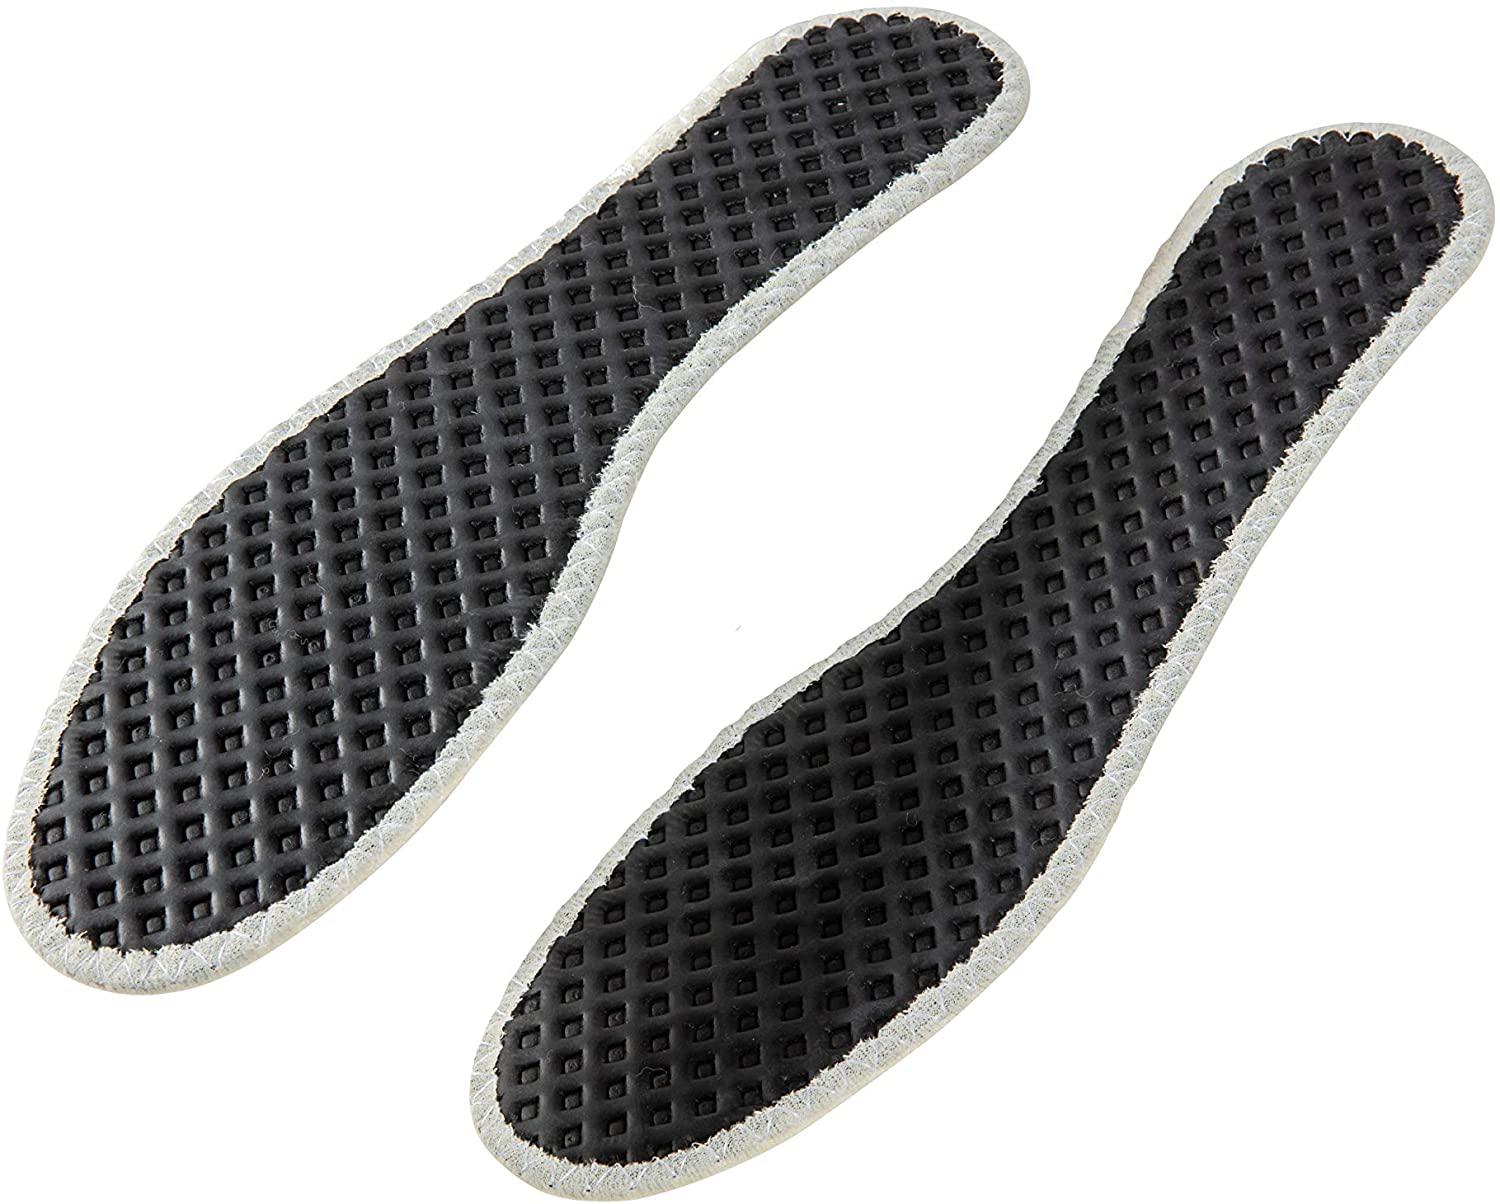 Wool Winter Insoles with Insulating Aluminum Layer and Activated Carbon for Boots Shoes, Insole Replacement for Man and Woman, Inner Soles for Winter, Shoe Inserts Accessories (Men/Us 9/42 EUR)